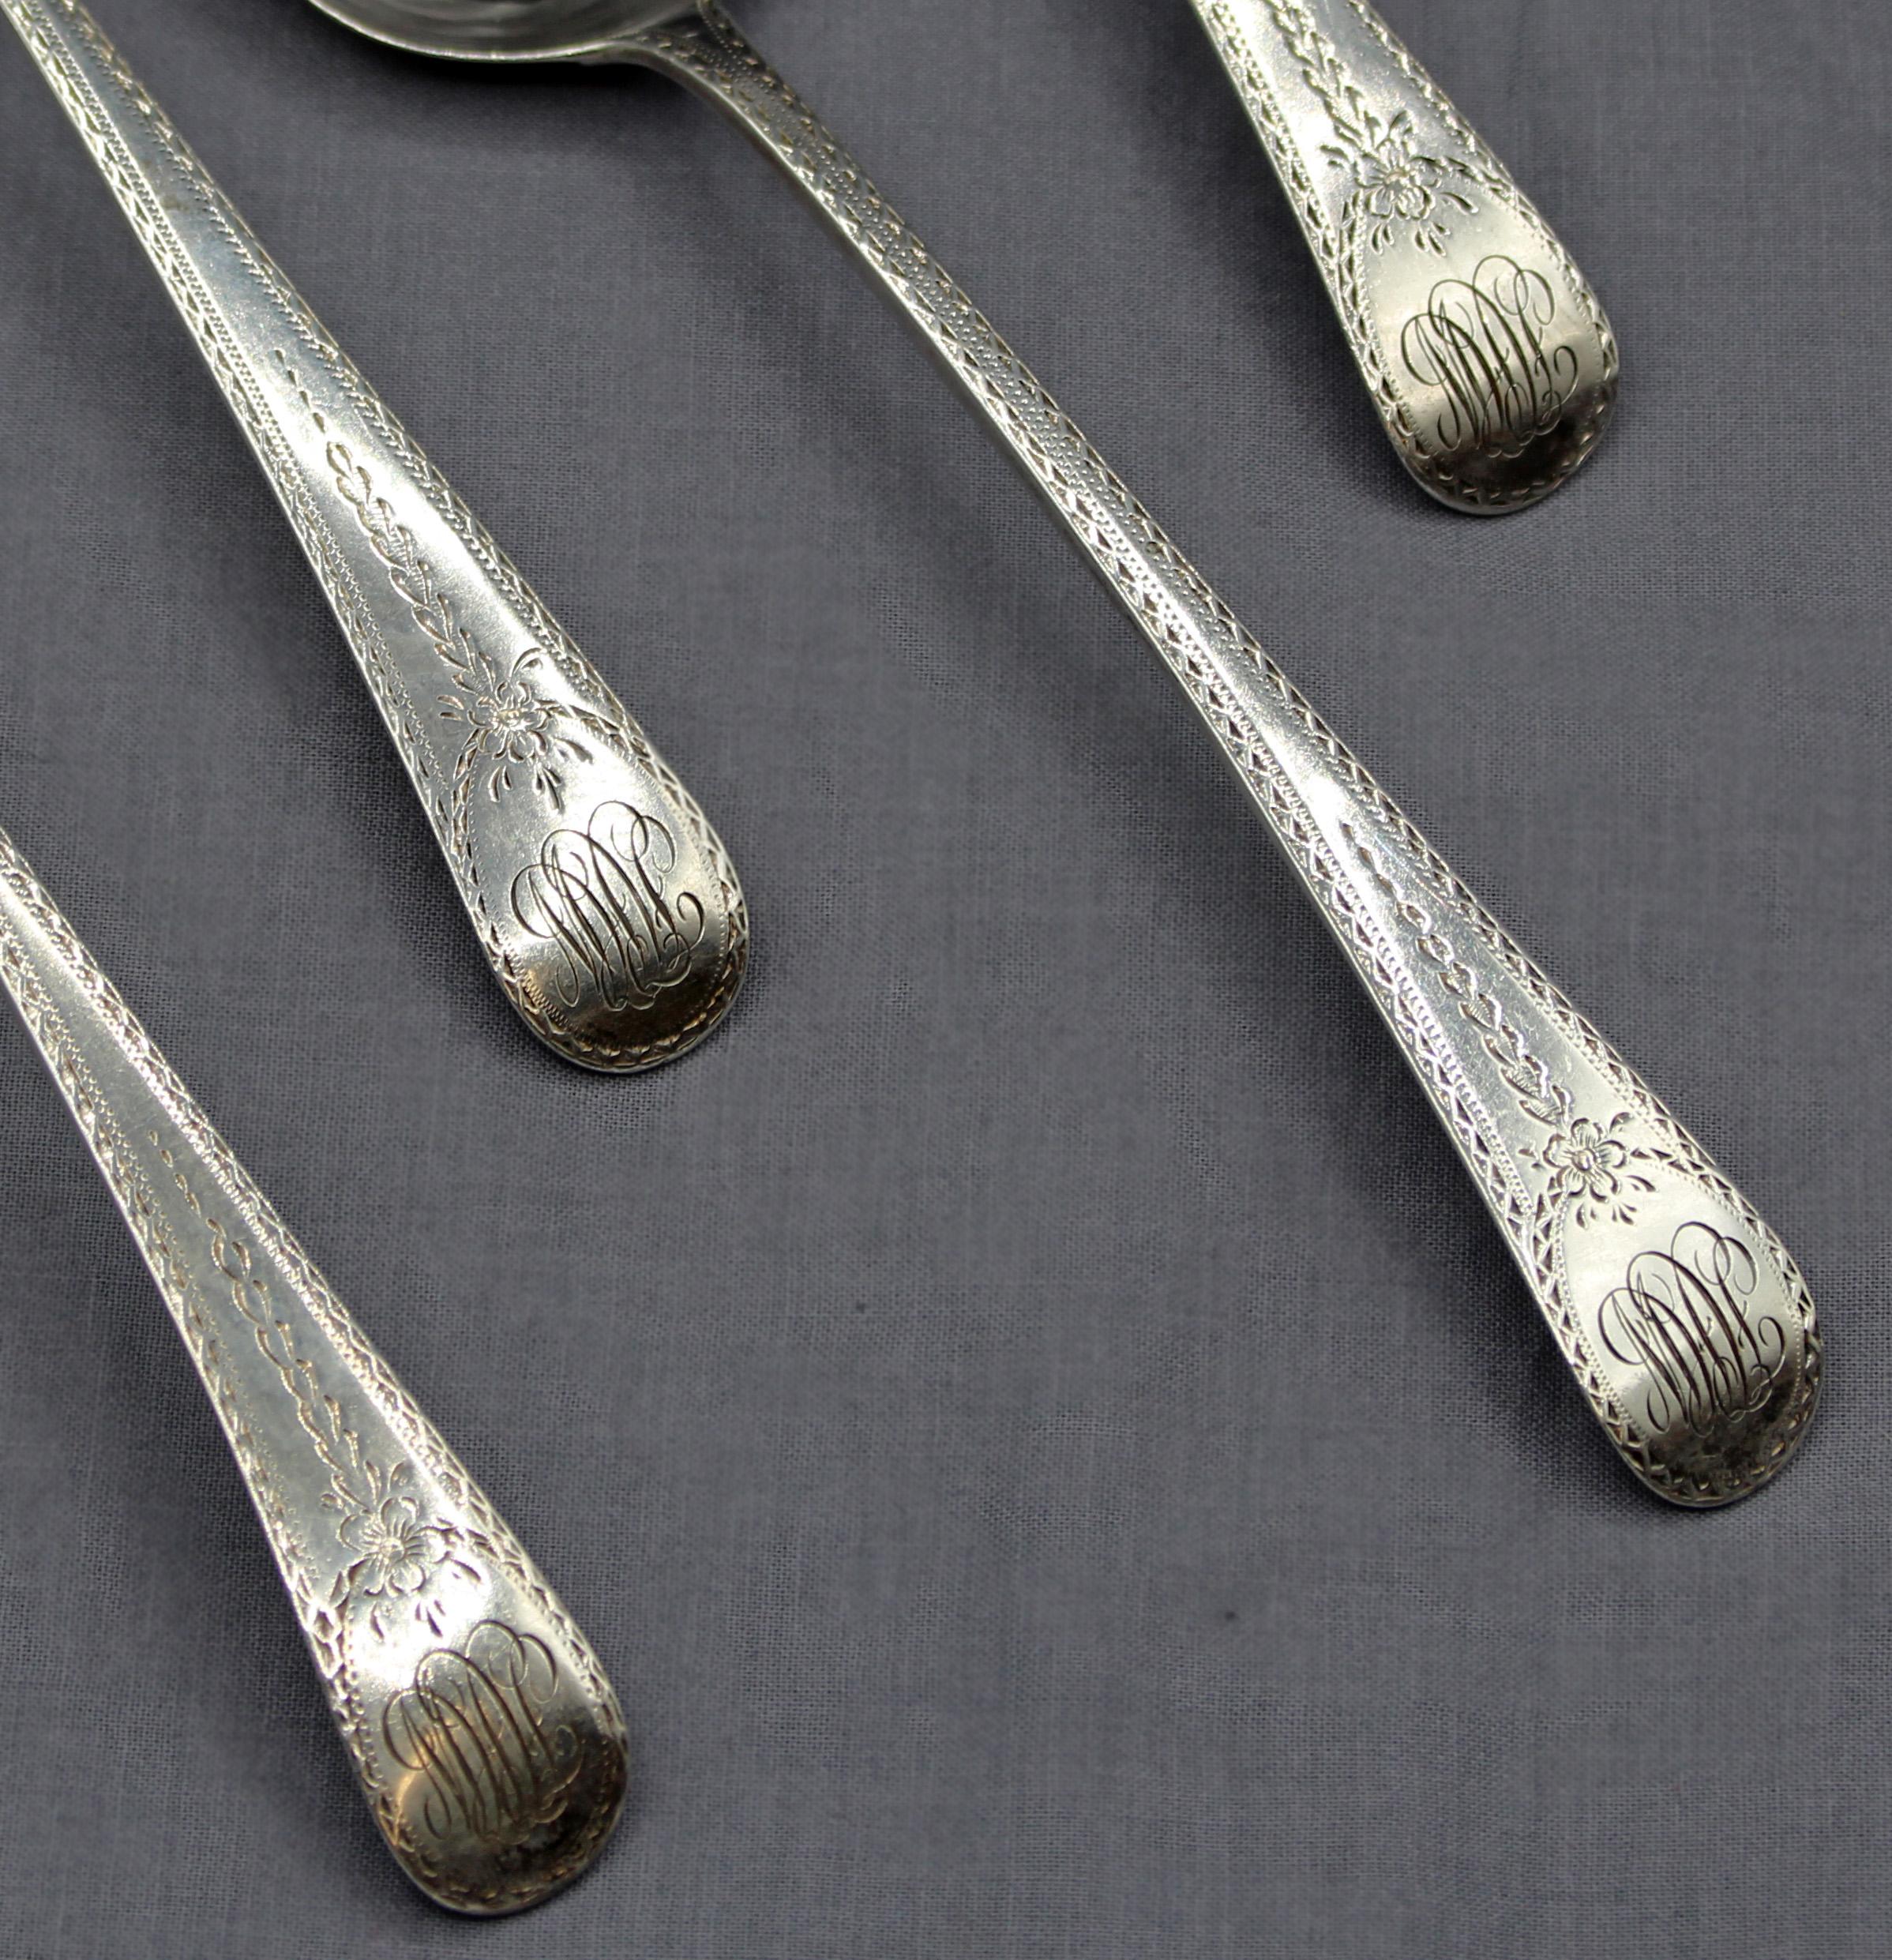 London, 1797, set of 4 Old English engraved pattern sterling silver spoons (suitable as tablespoons) by Peter & Ann Bateman. Later monograms. Elegant bright-cut Classical work was a hallmark of the Bateman family's silver. 7 troy oz.
8 1/2